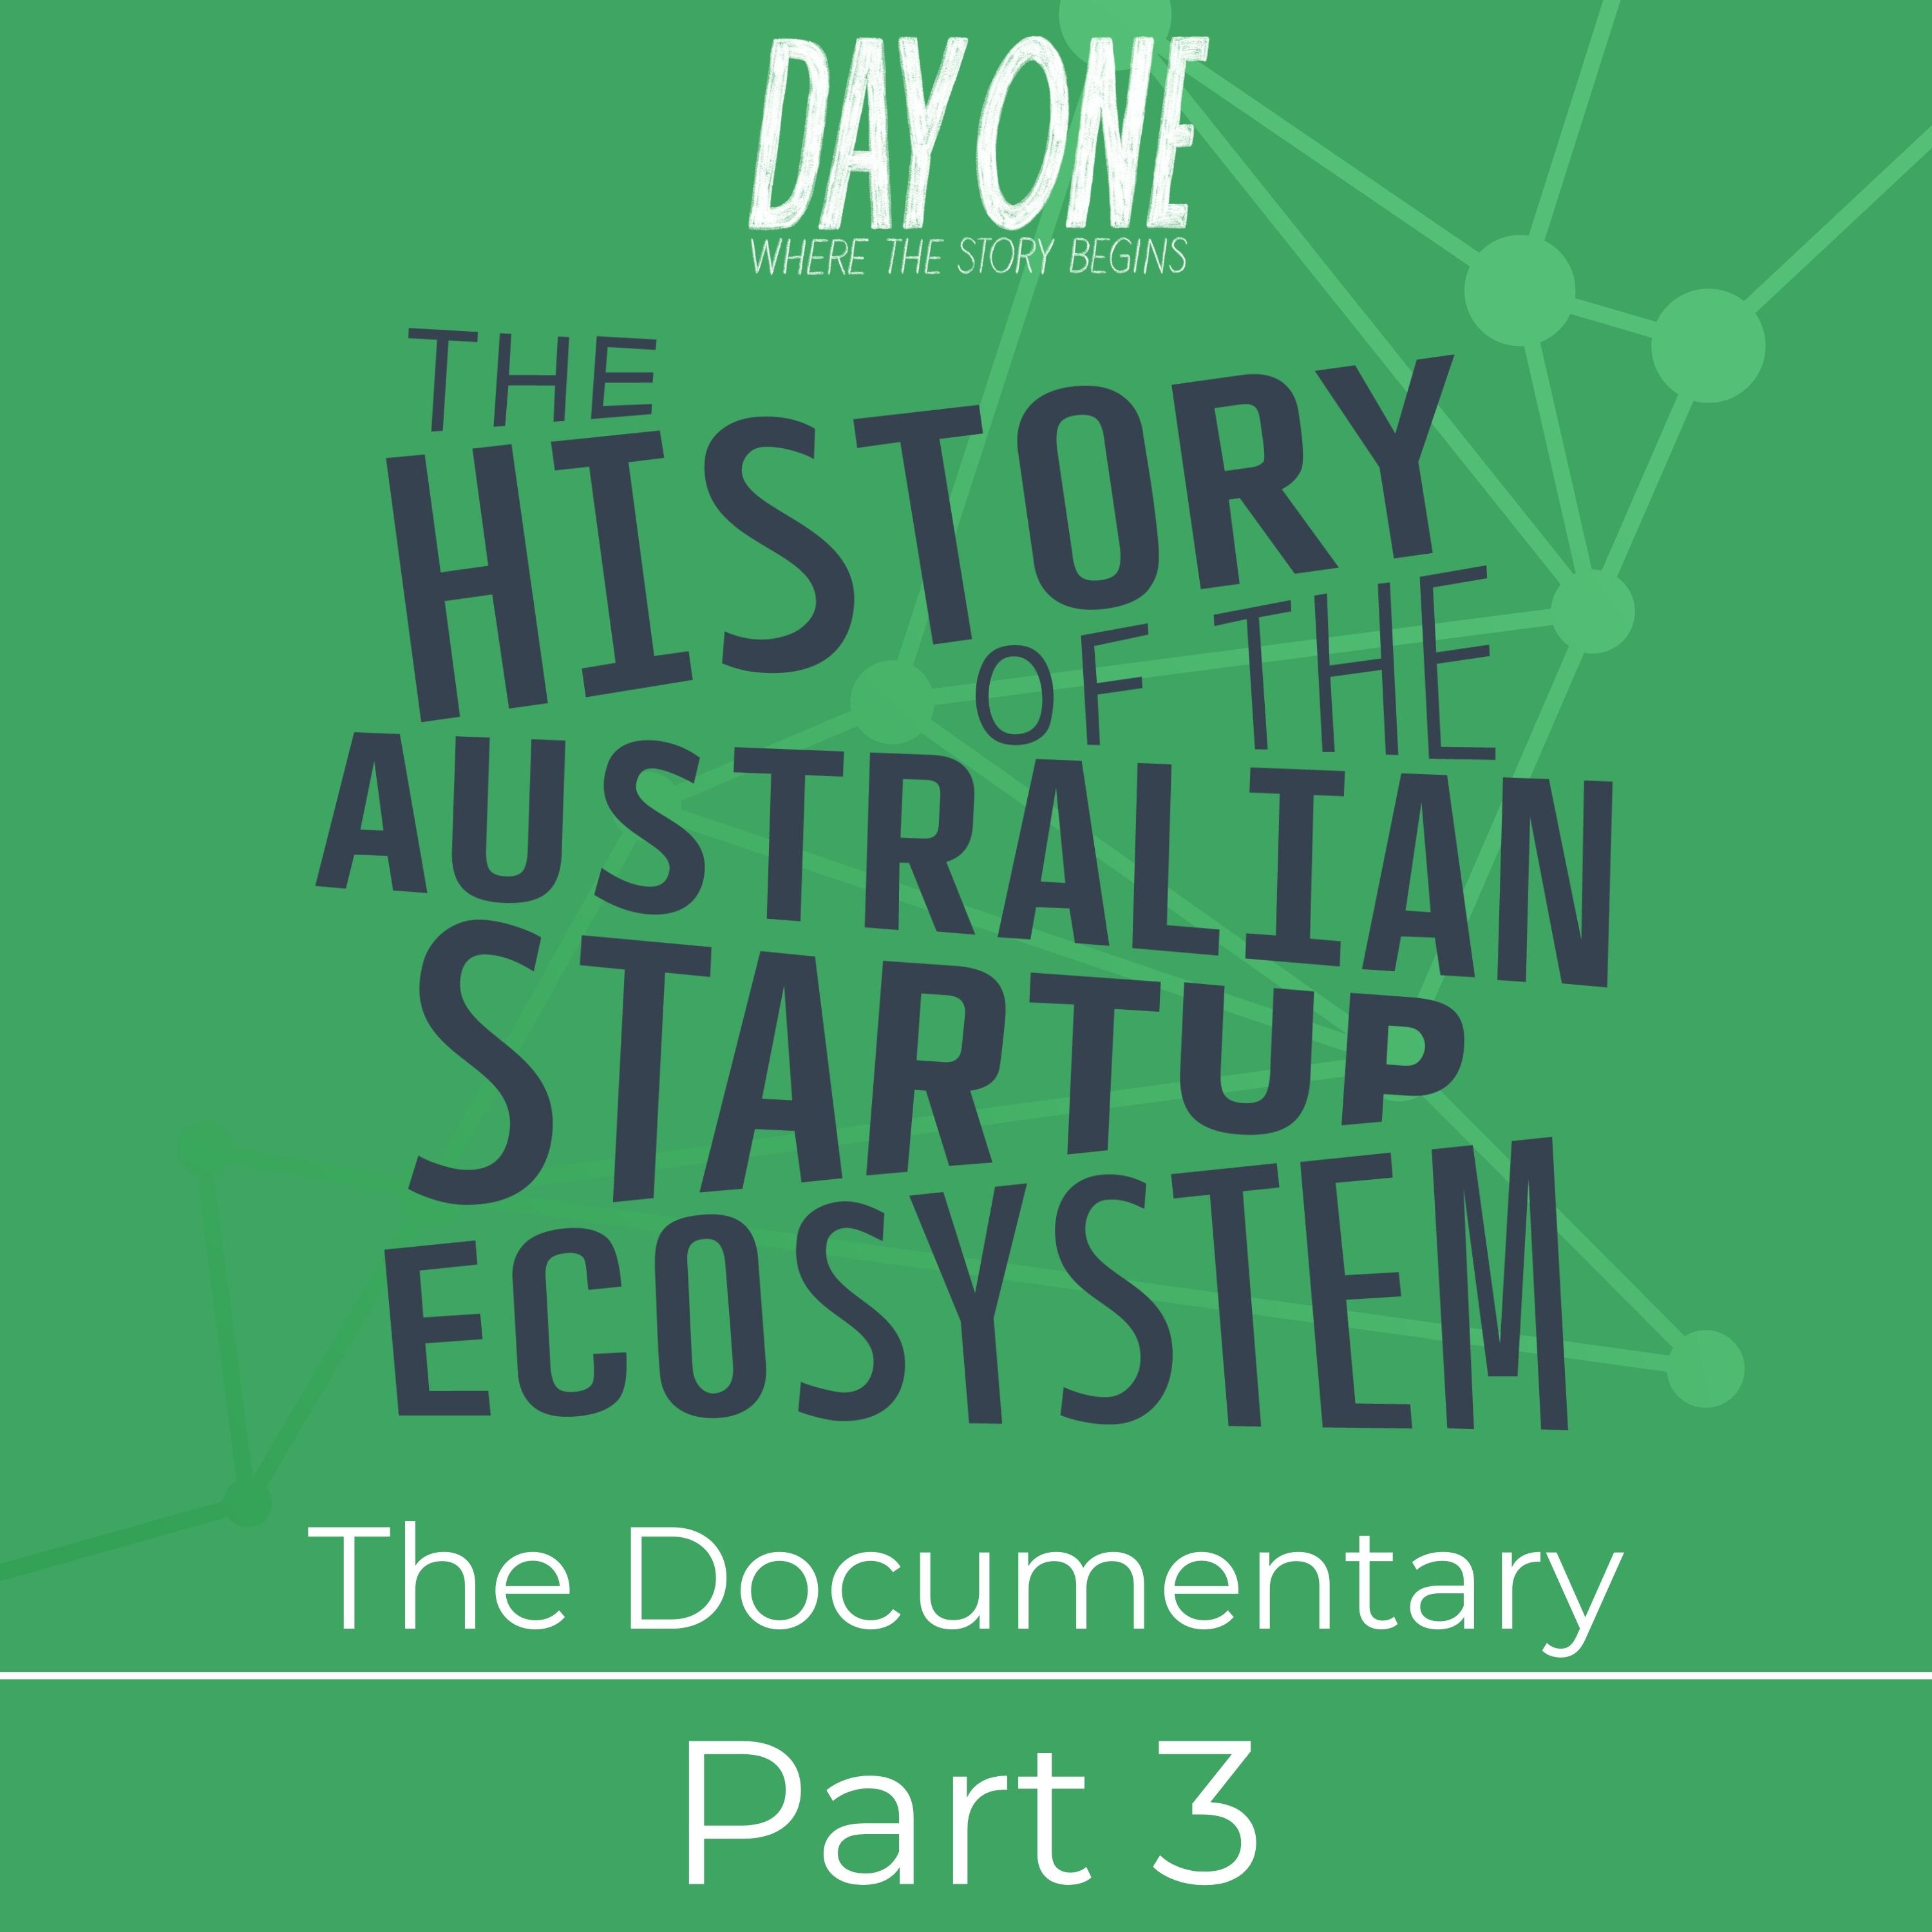 The Documentary: Part 3 - The History of the Australian Startup Ecosystem: Documentary